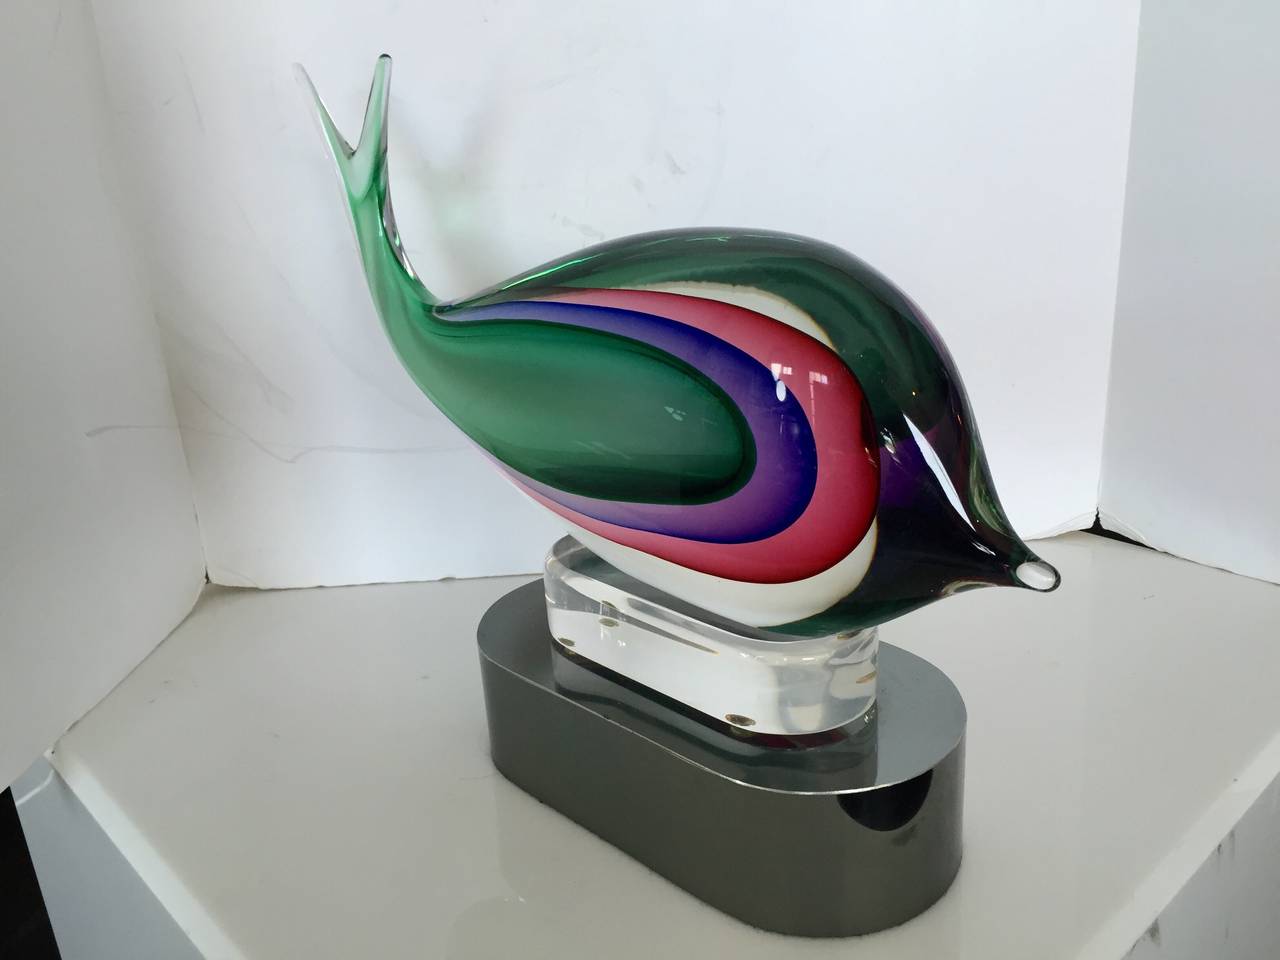 Beautiful Murano Glass Fish by Luigi Onesta. Resting on lucite and wrapped steel base. Signed on underside.